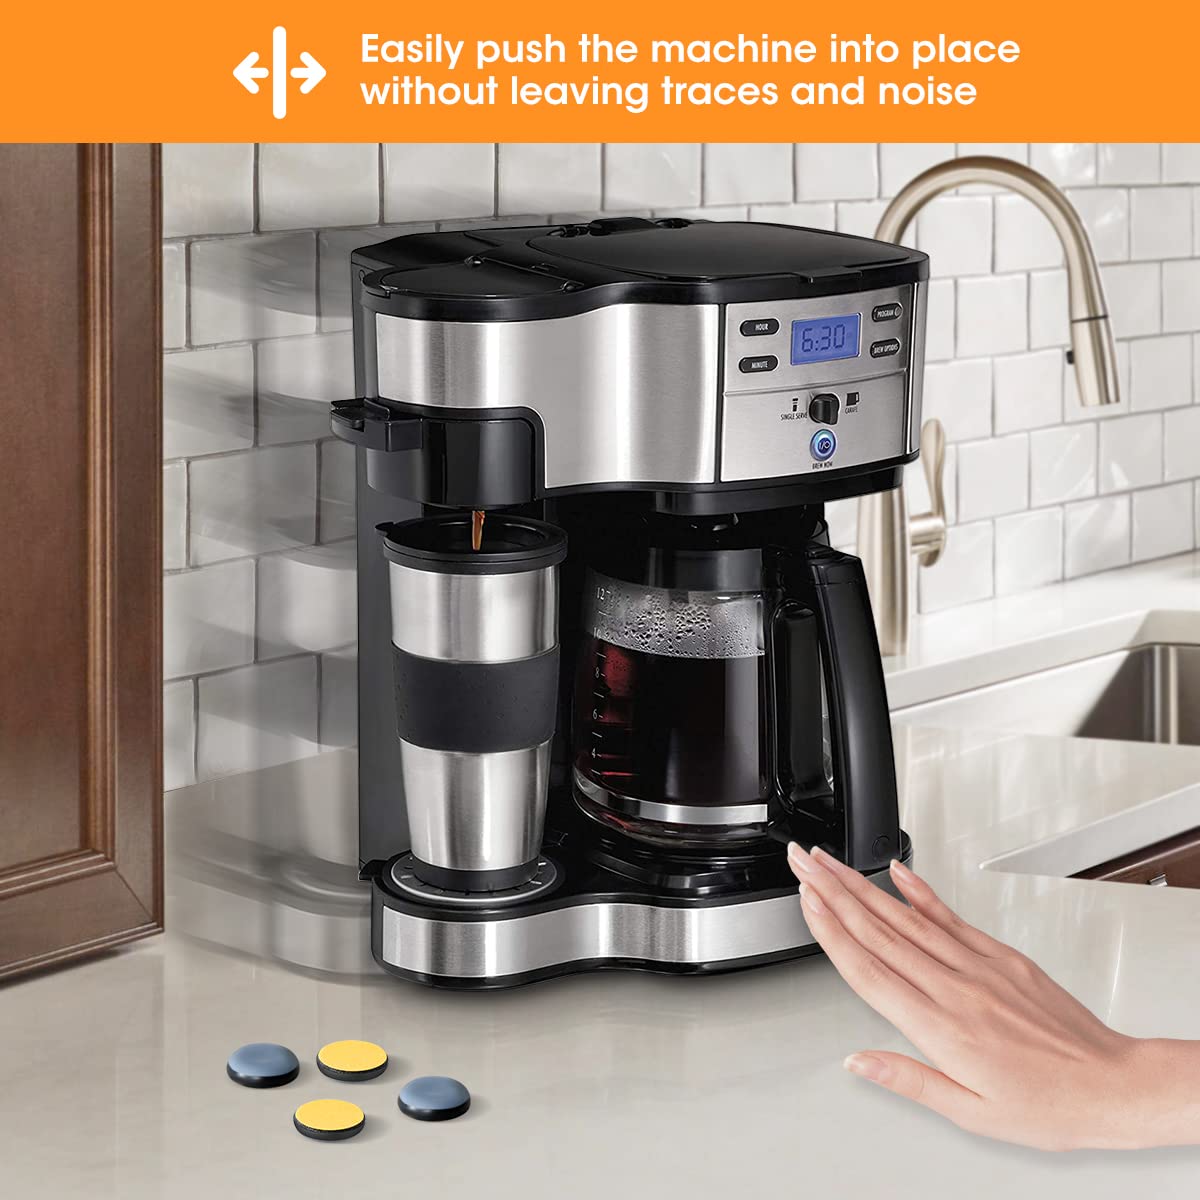 easily push the machine into place without leaving traces and noise